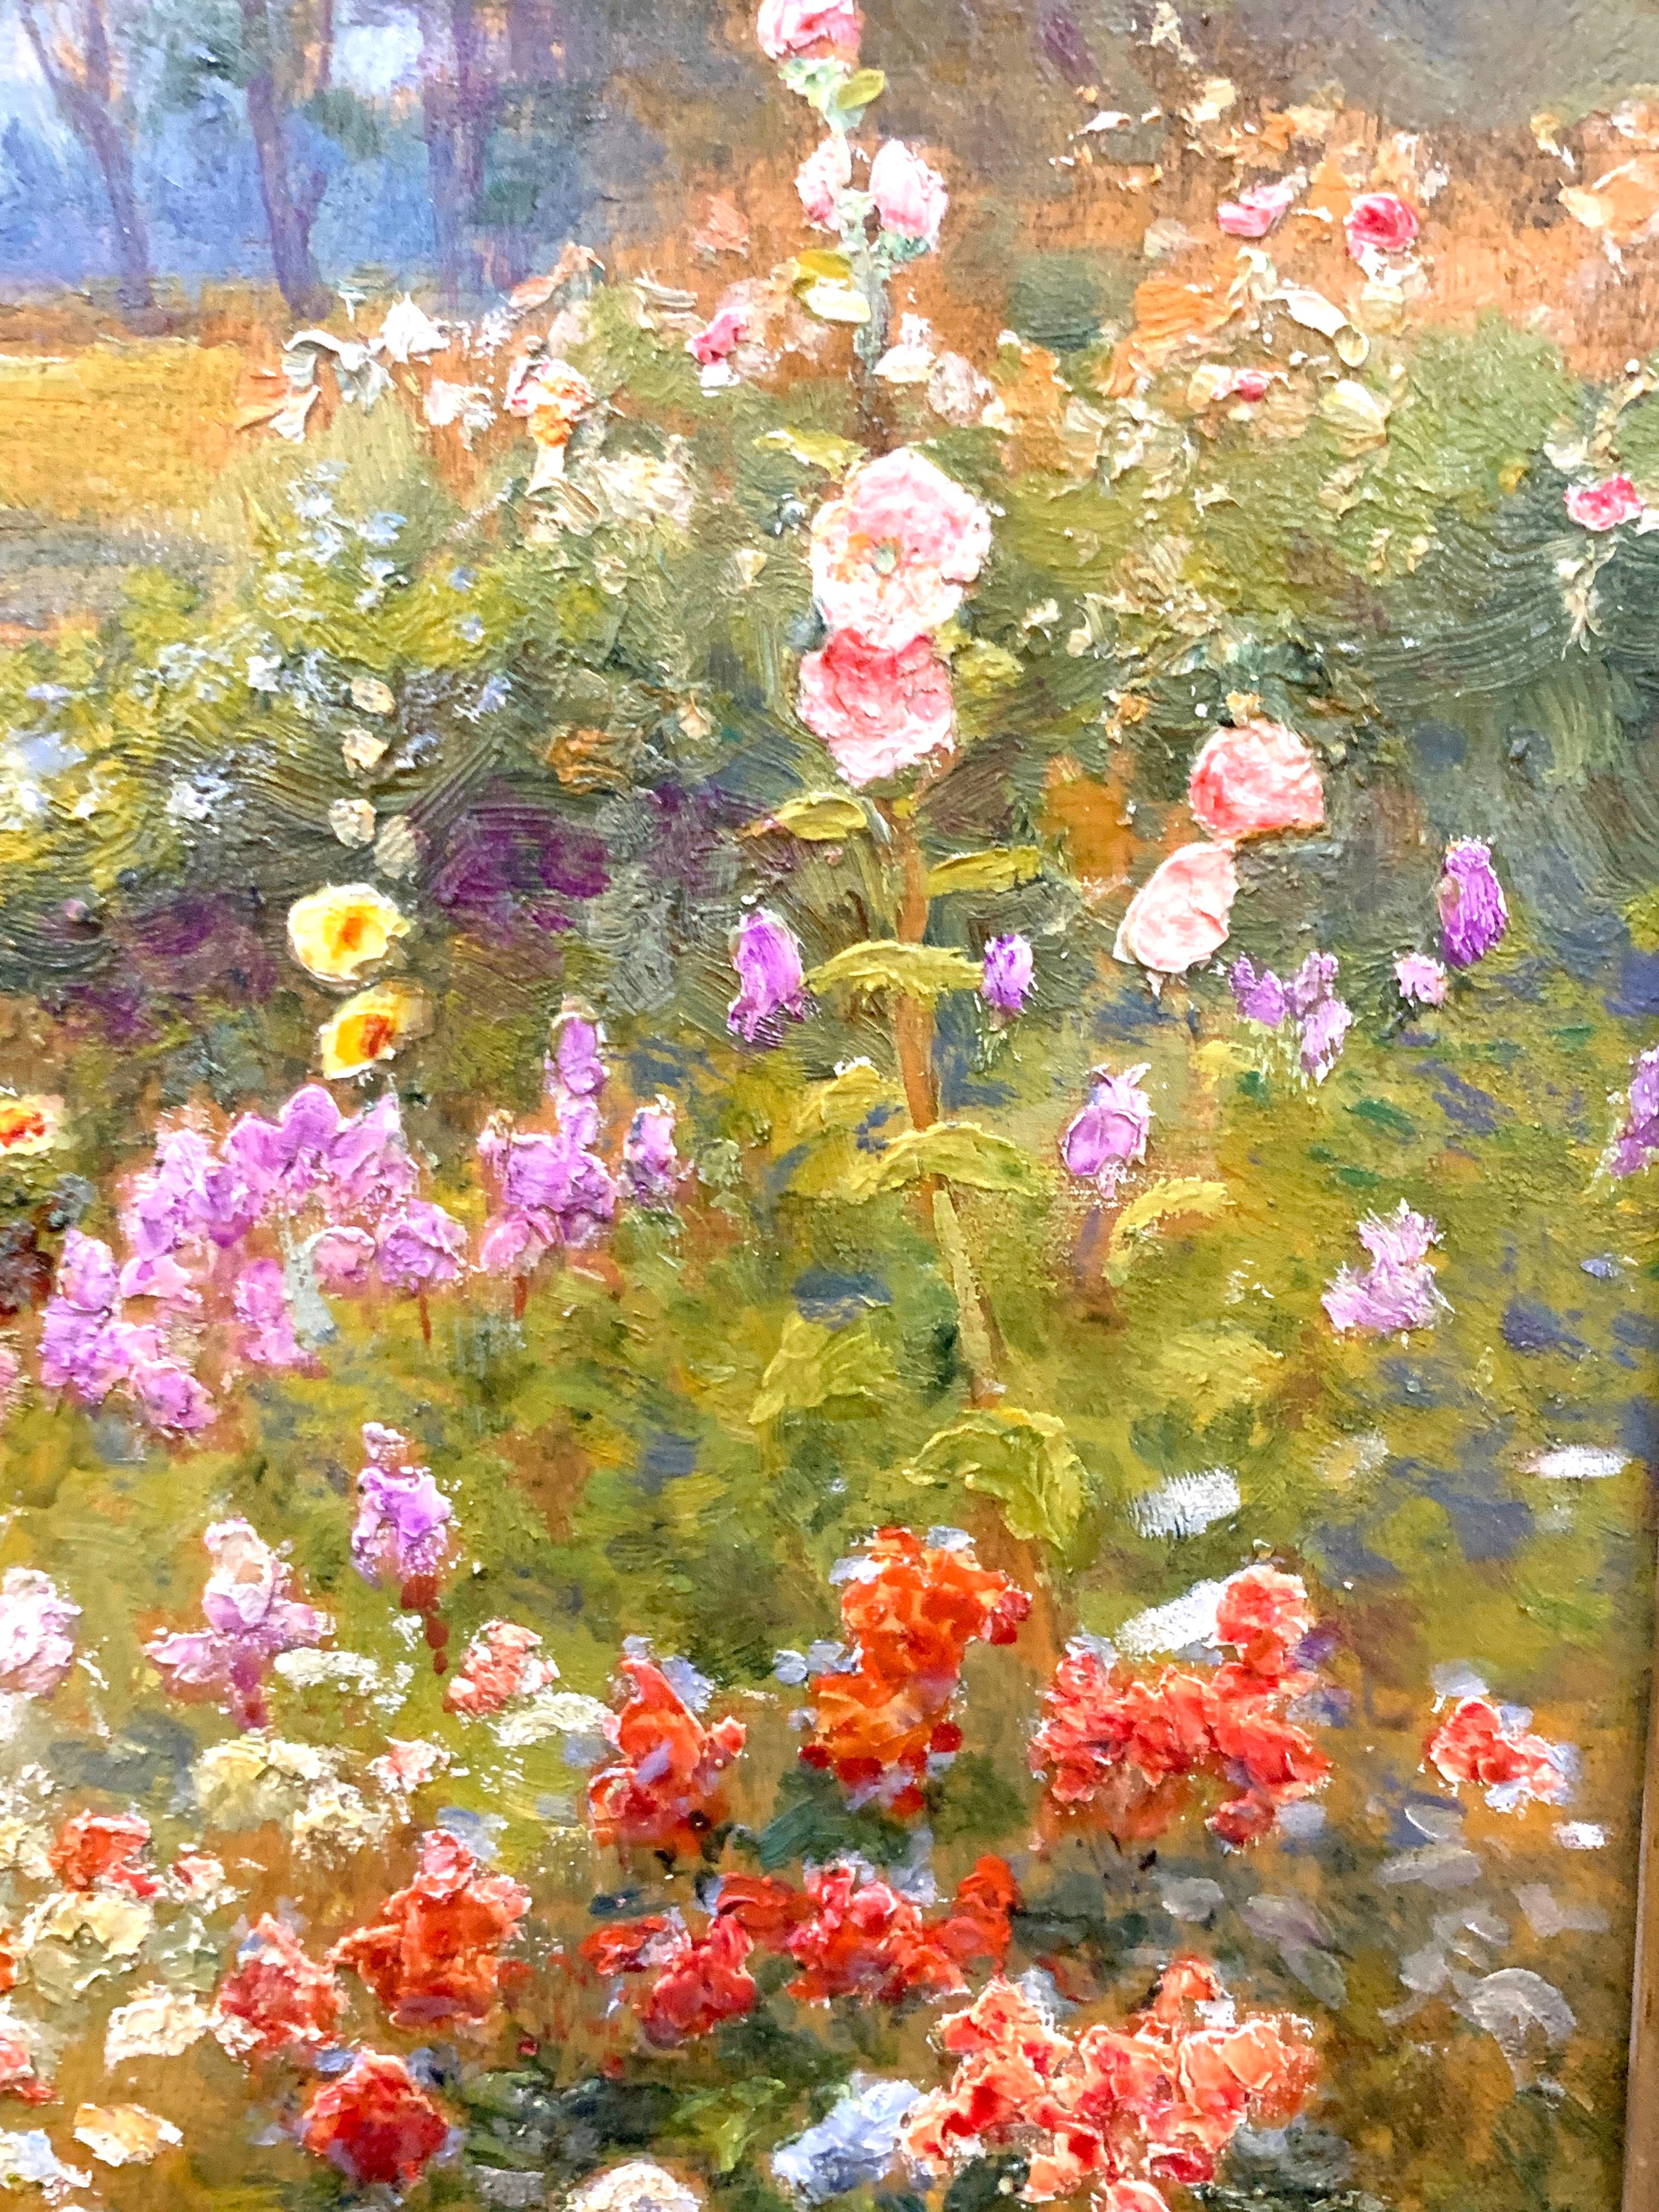 English 19th century Garden landscape with flowers, roses, hollyhock, in the late summer sun.

Walter Follen Bishop was a Liverpool artist, though he also lived in both London and Jersey. He was fascinated by the play of light on leaves, bracken,